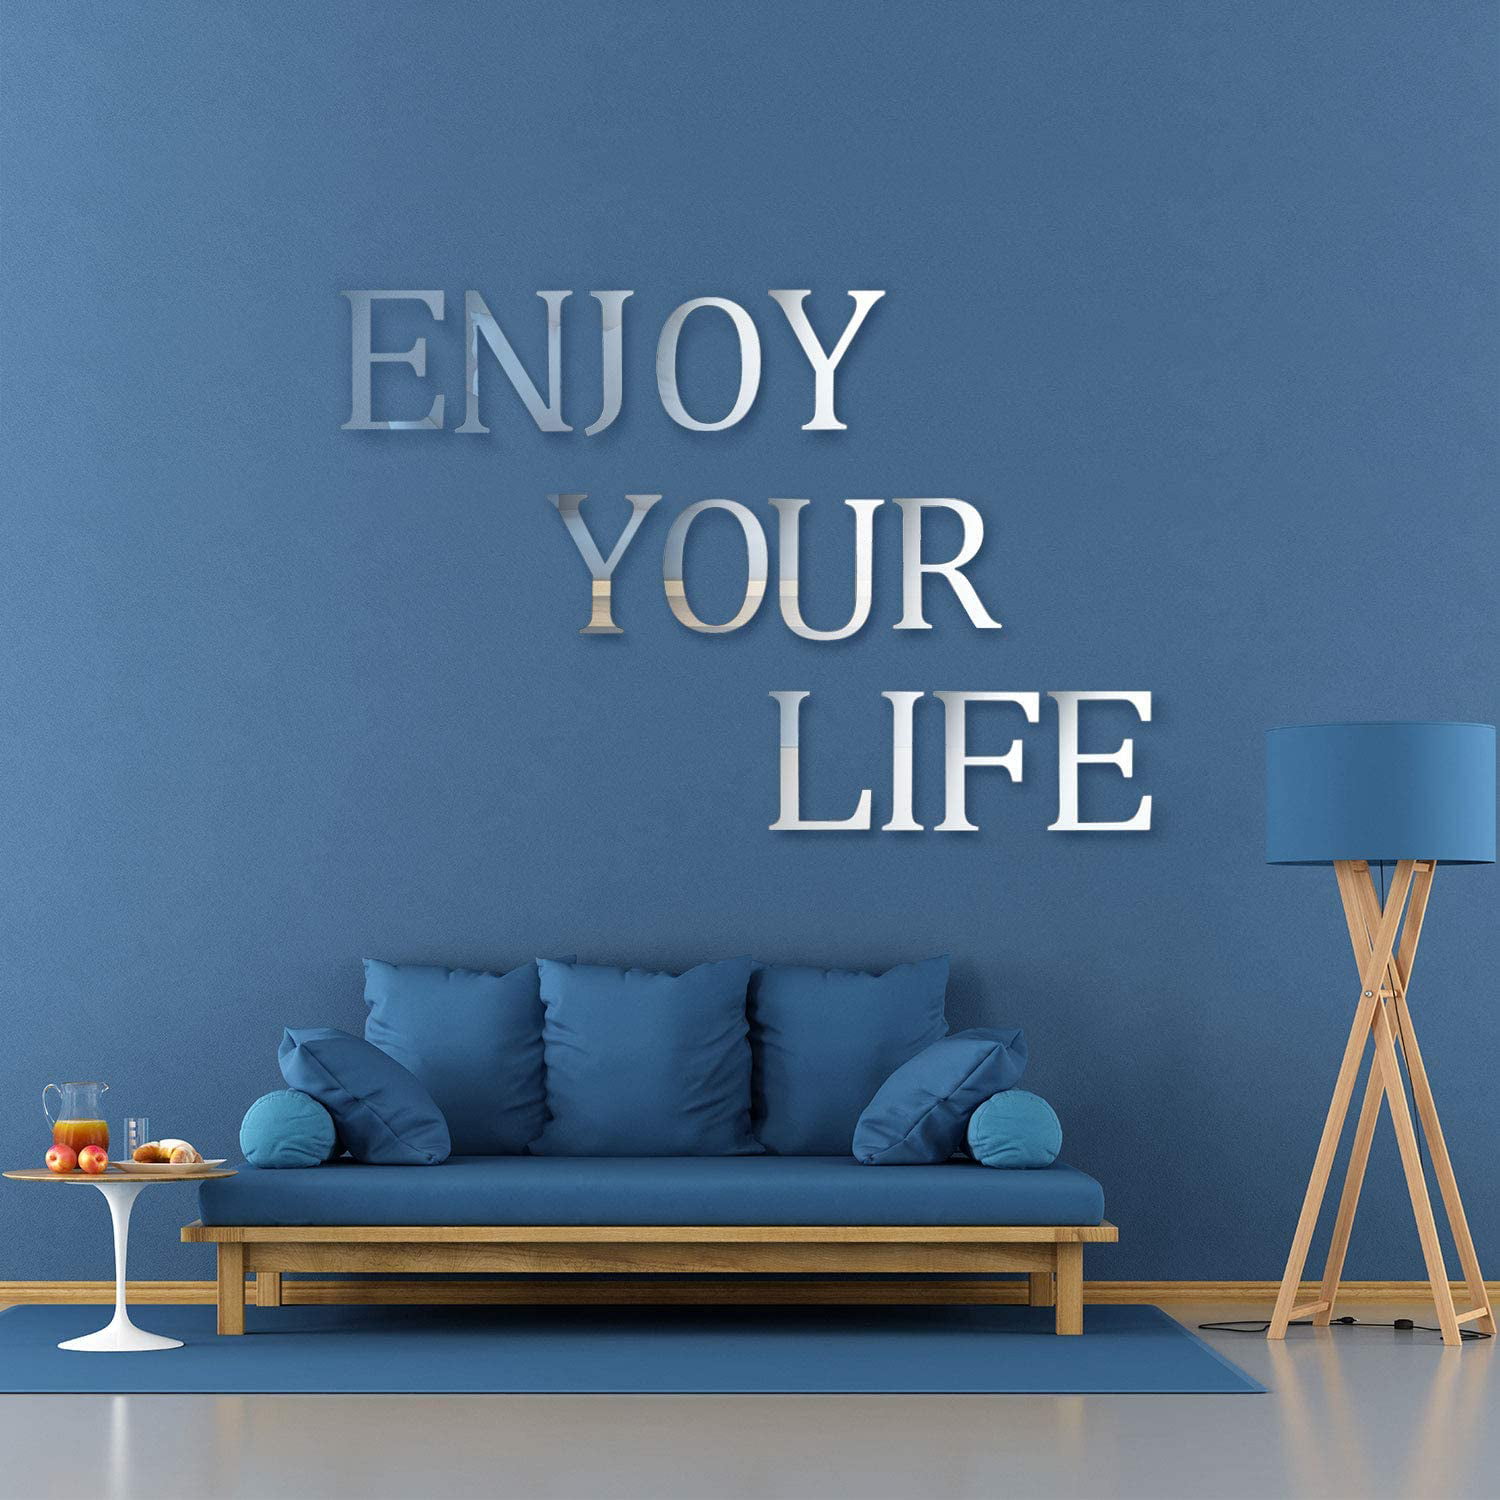 Mirror Face Wall Sticker 26 Letters Art DIY Mural Decal Living Room Decor 1Piece